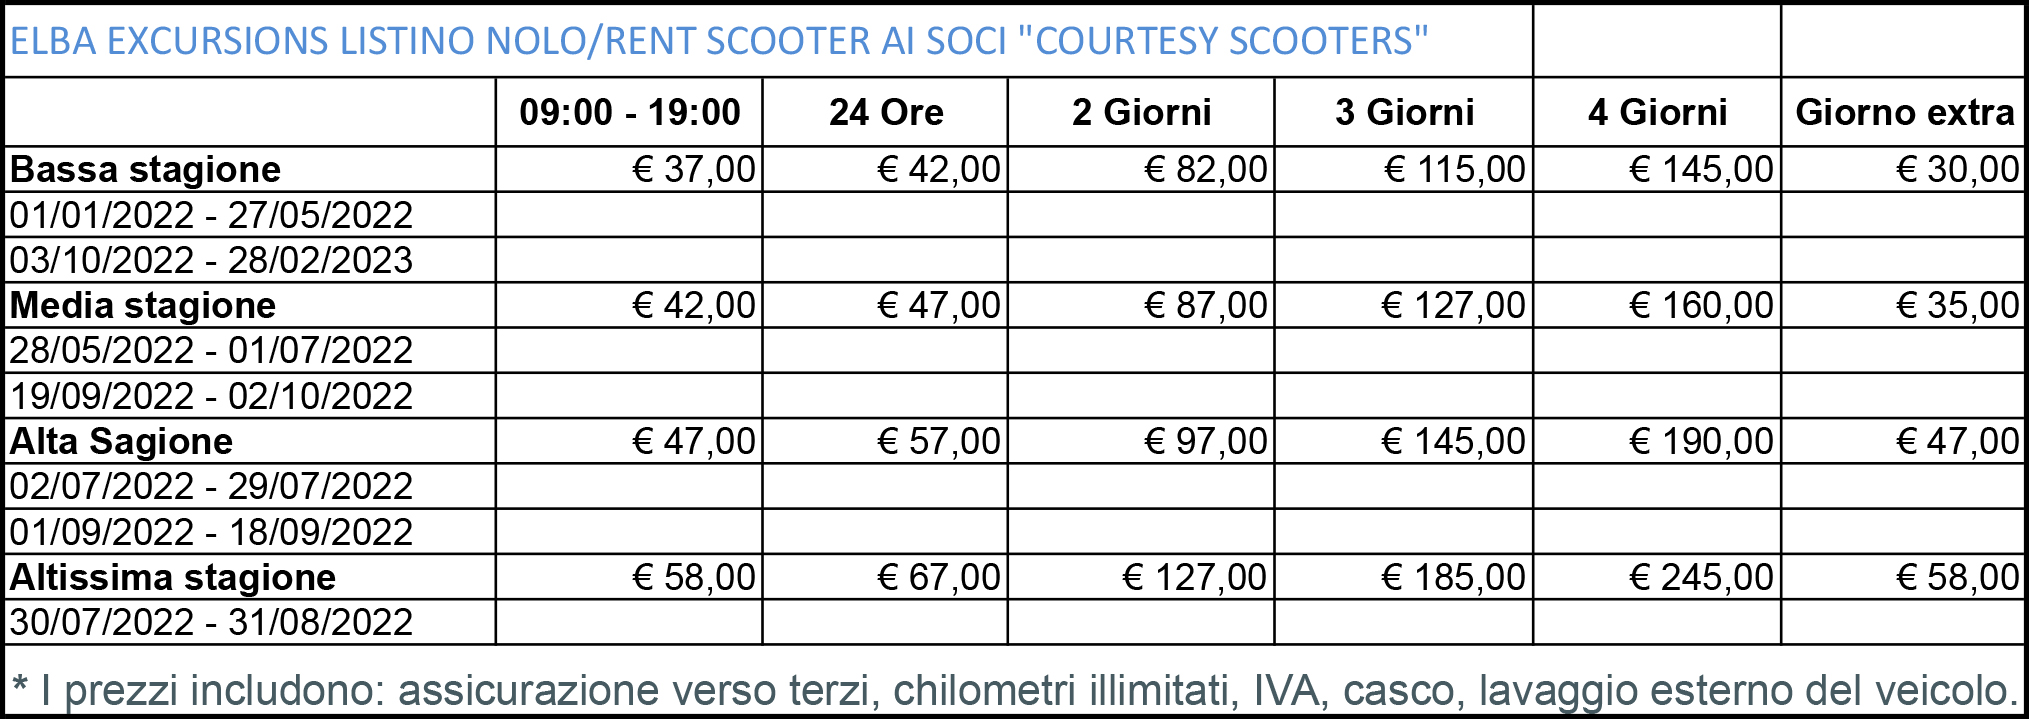 ee LISTINO NOLO SCOOTER 2022